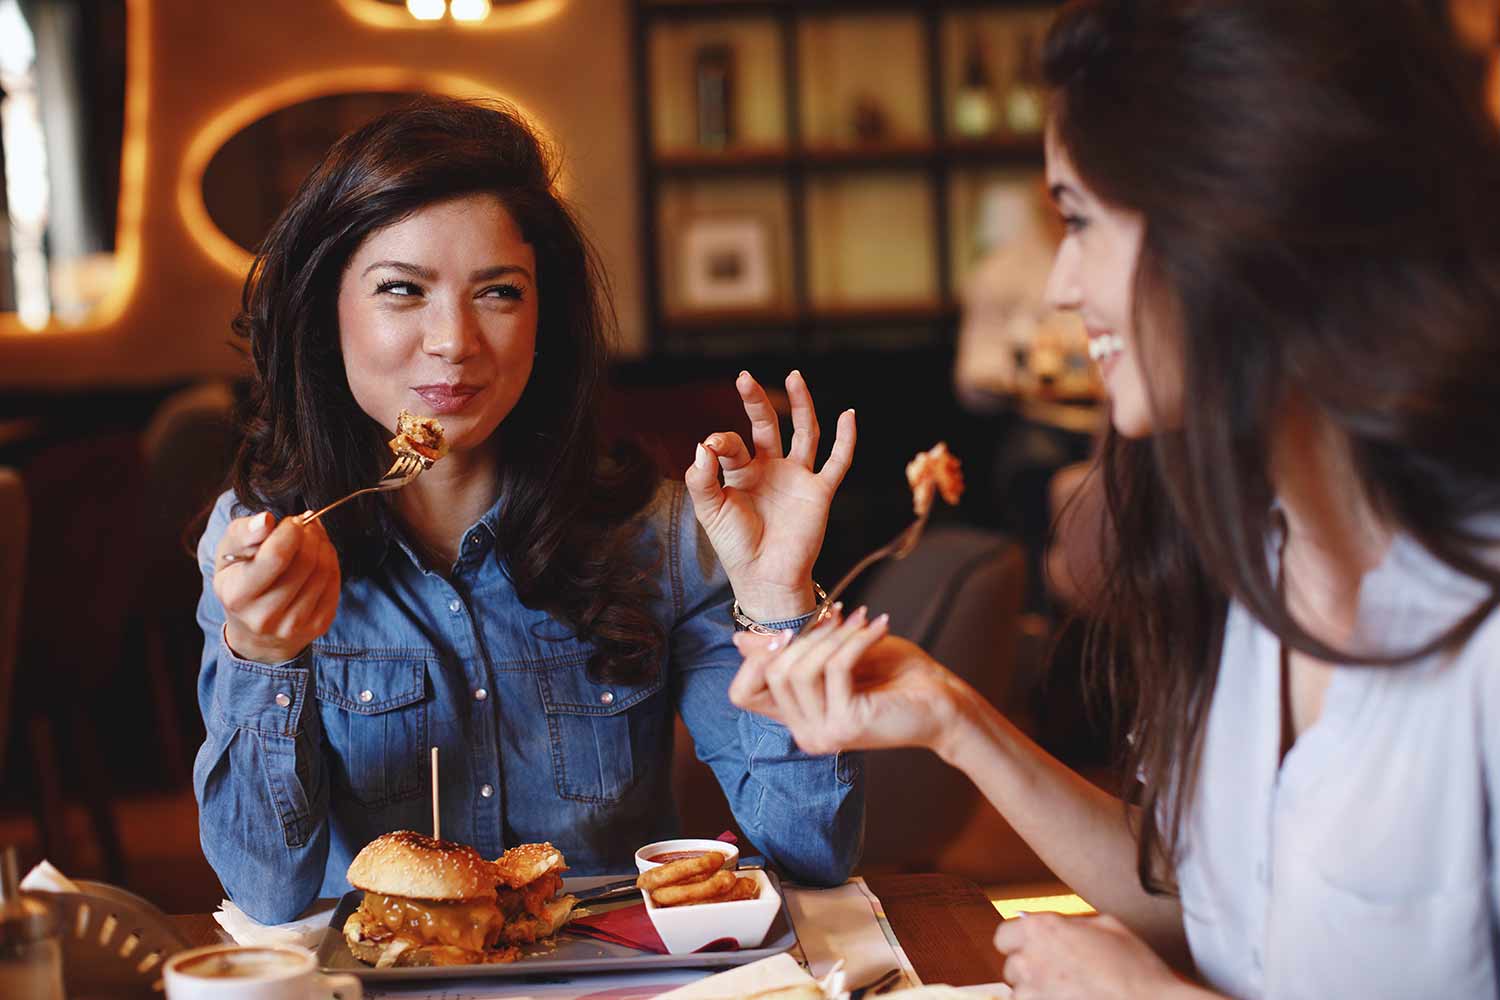 Two women at a burger restaurant laughing and enjoying food